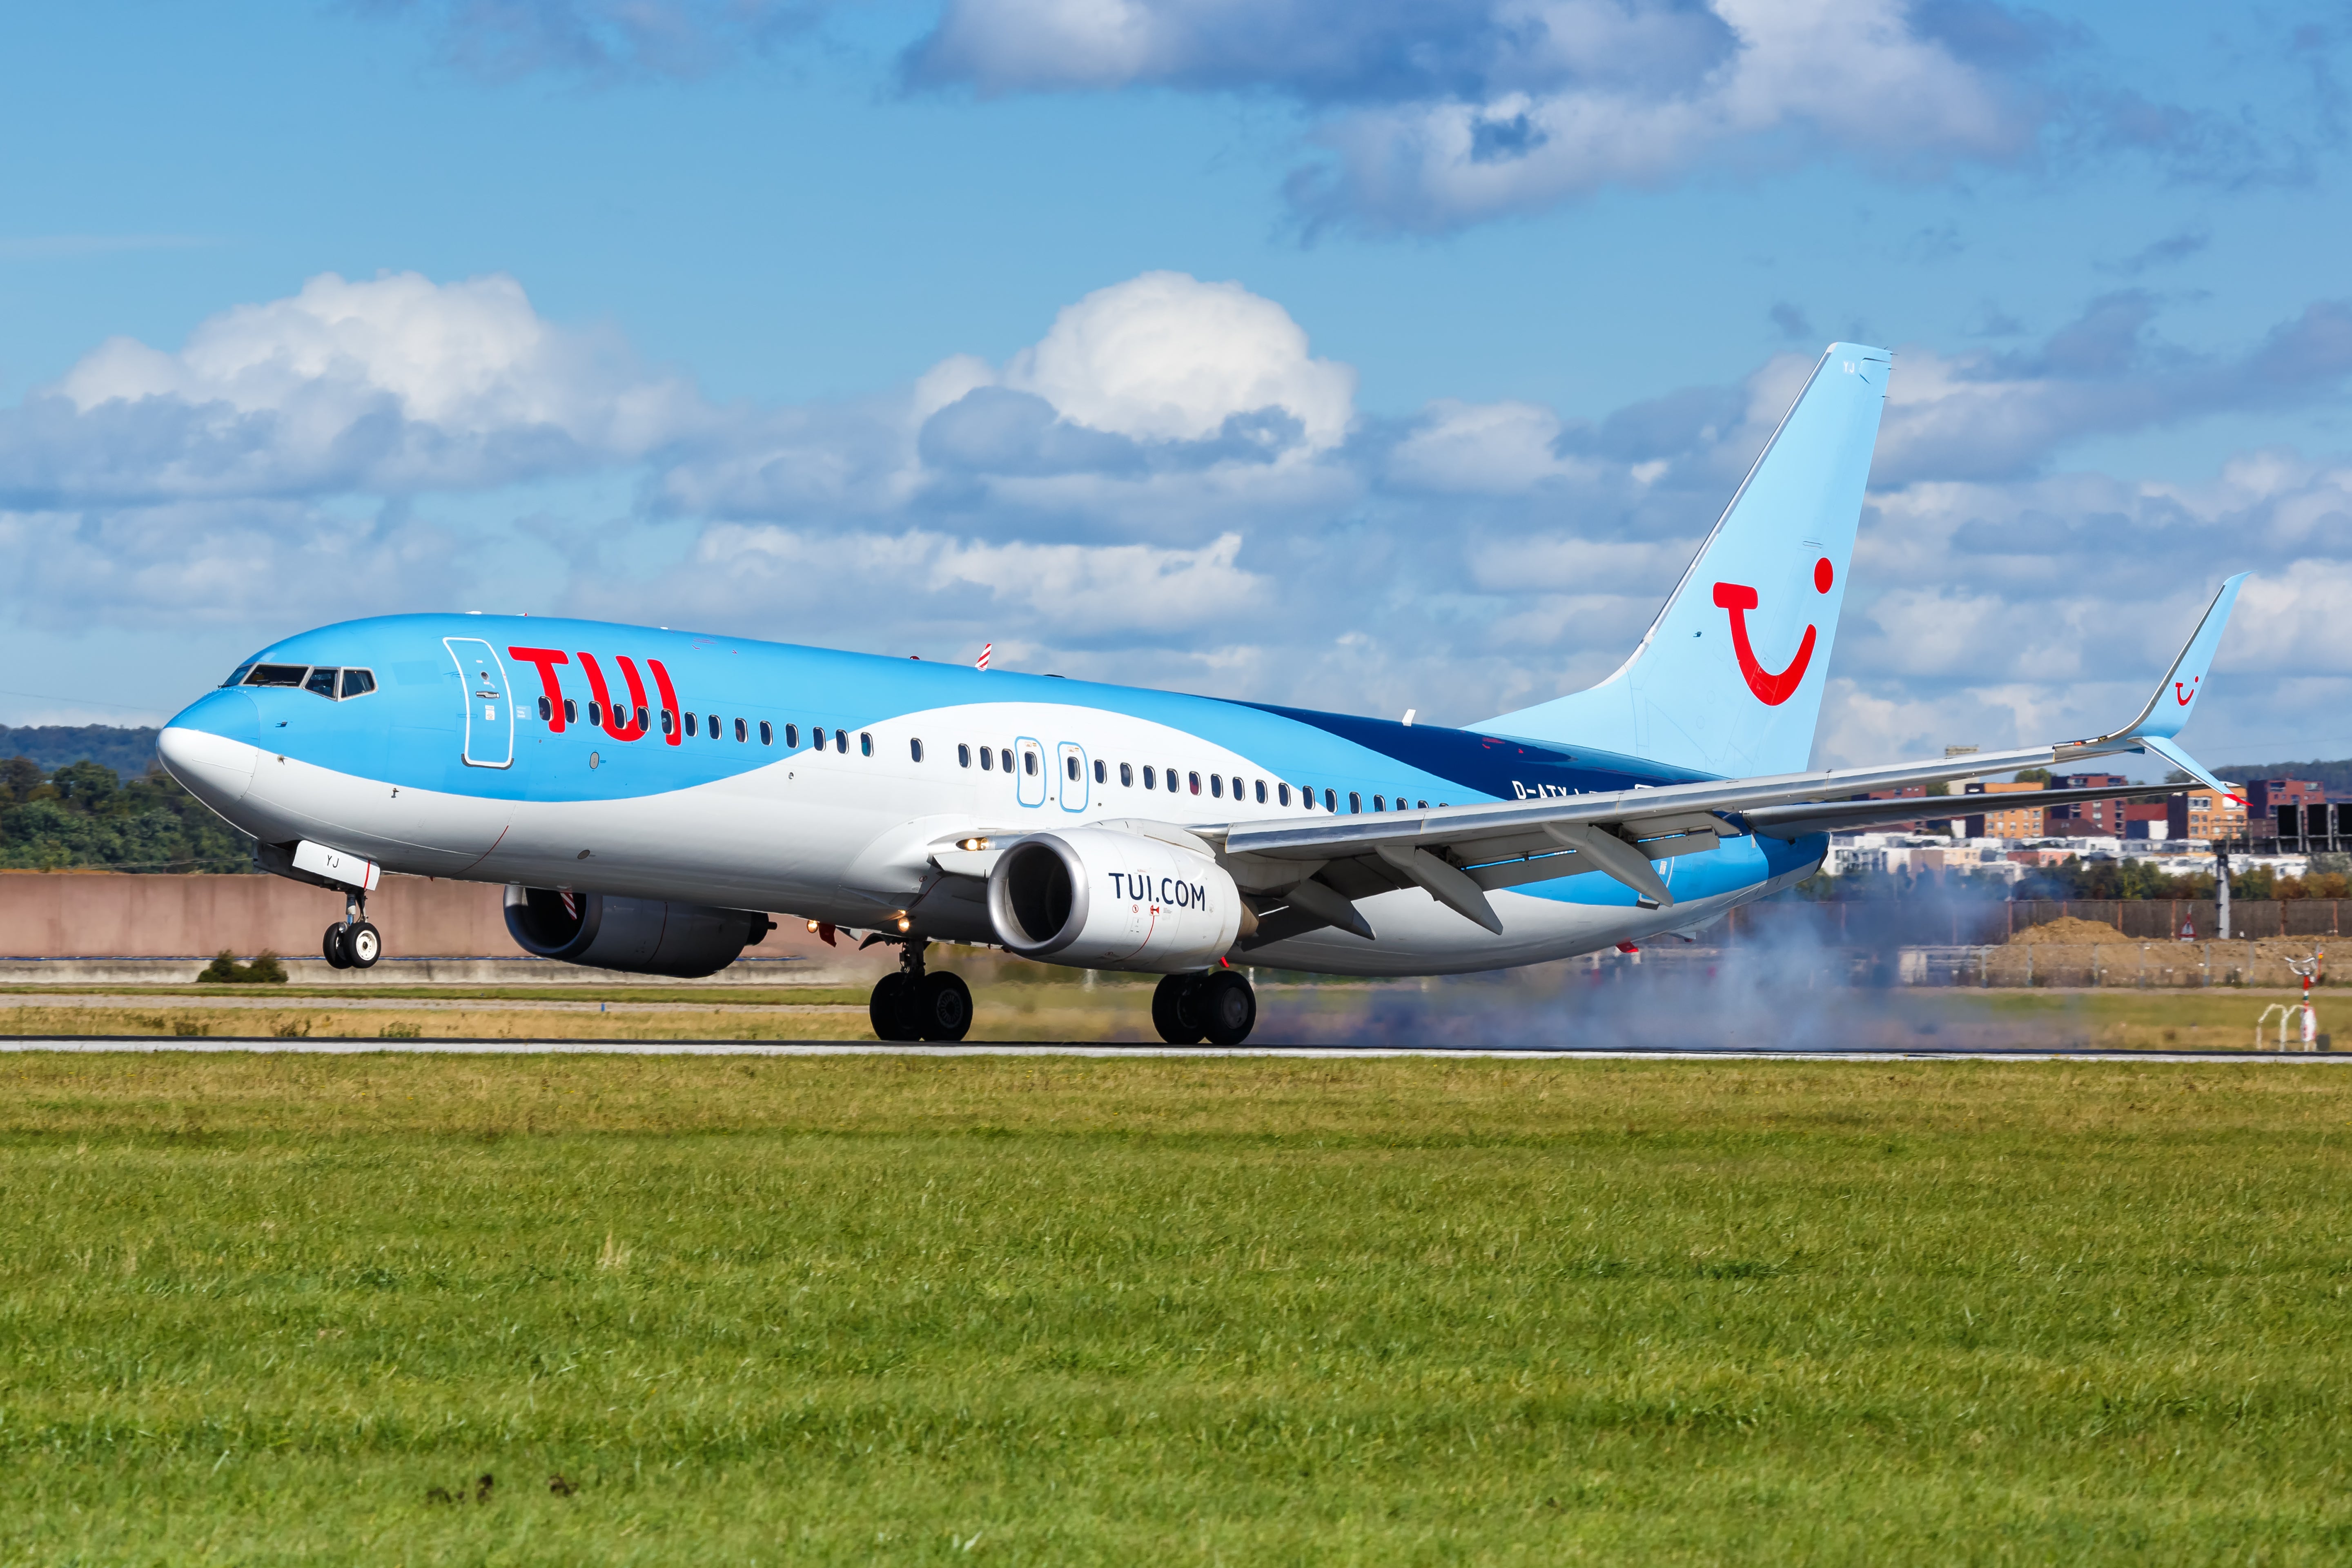 TUI announced cancellations due to operation and supply issues